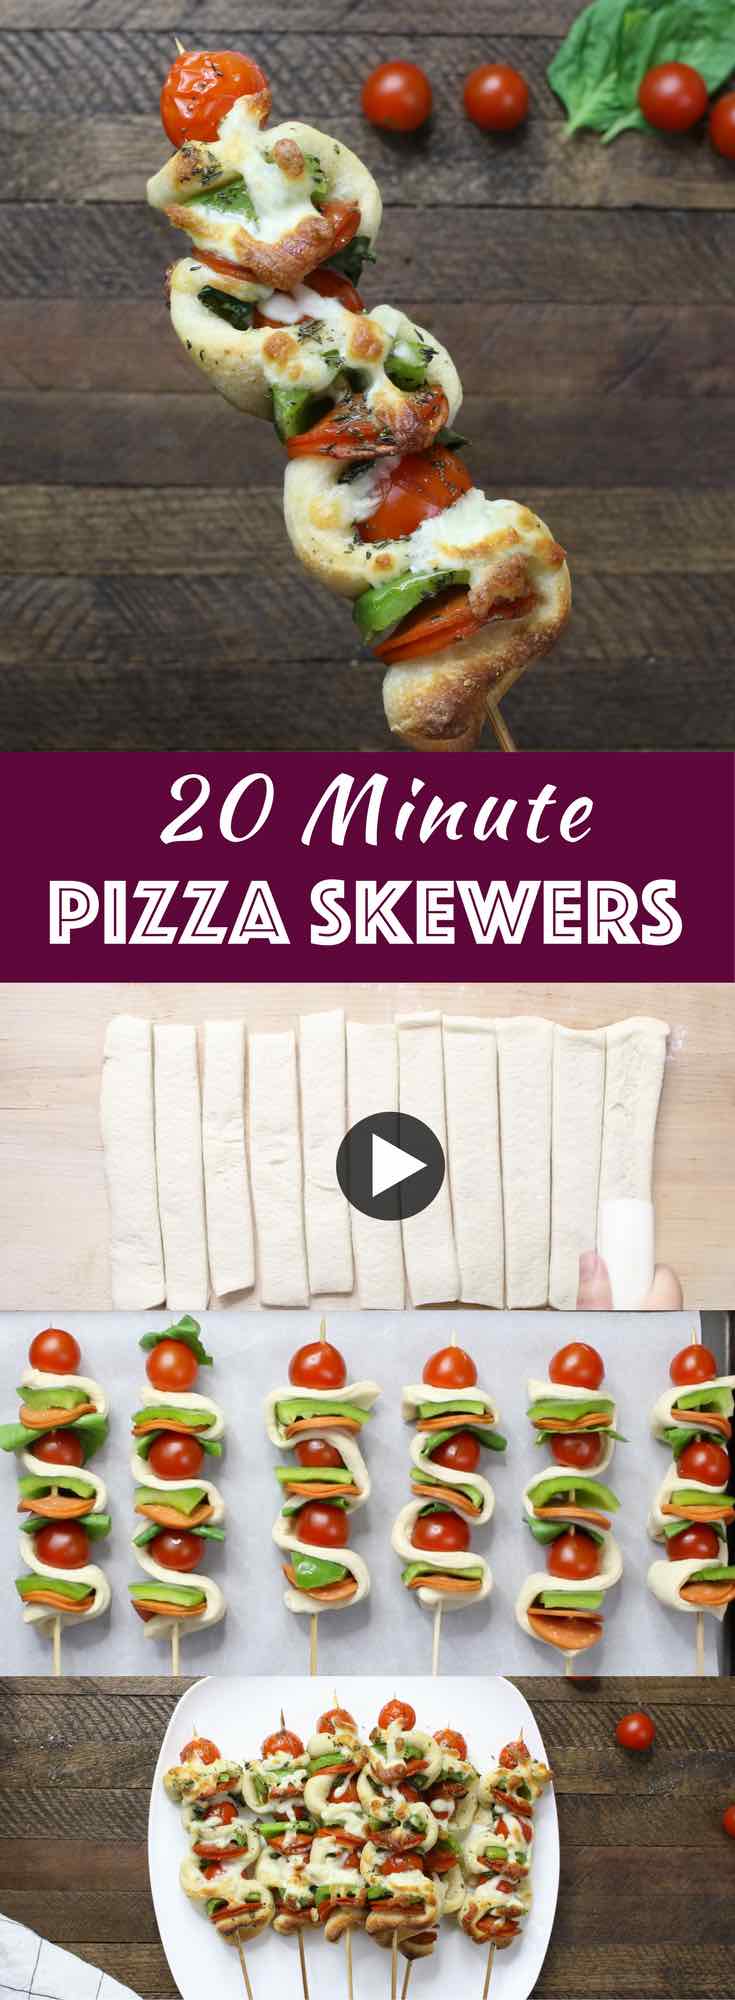 Pizza Kabobs are a delicious appetizer to make using the grill or oven. Get the kids involved weaving the pizza dough onto skewers and customizing toppings! #pizzakabob #pizzakebab